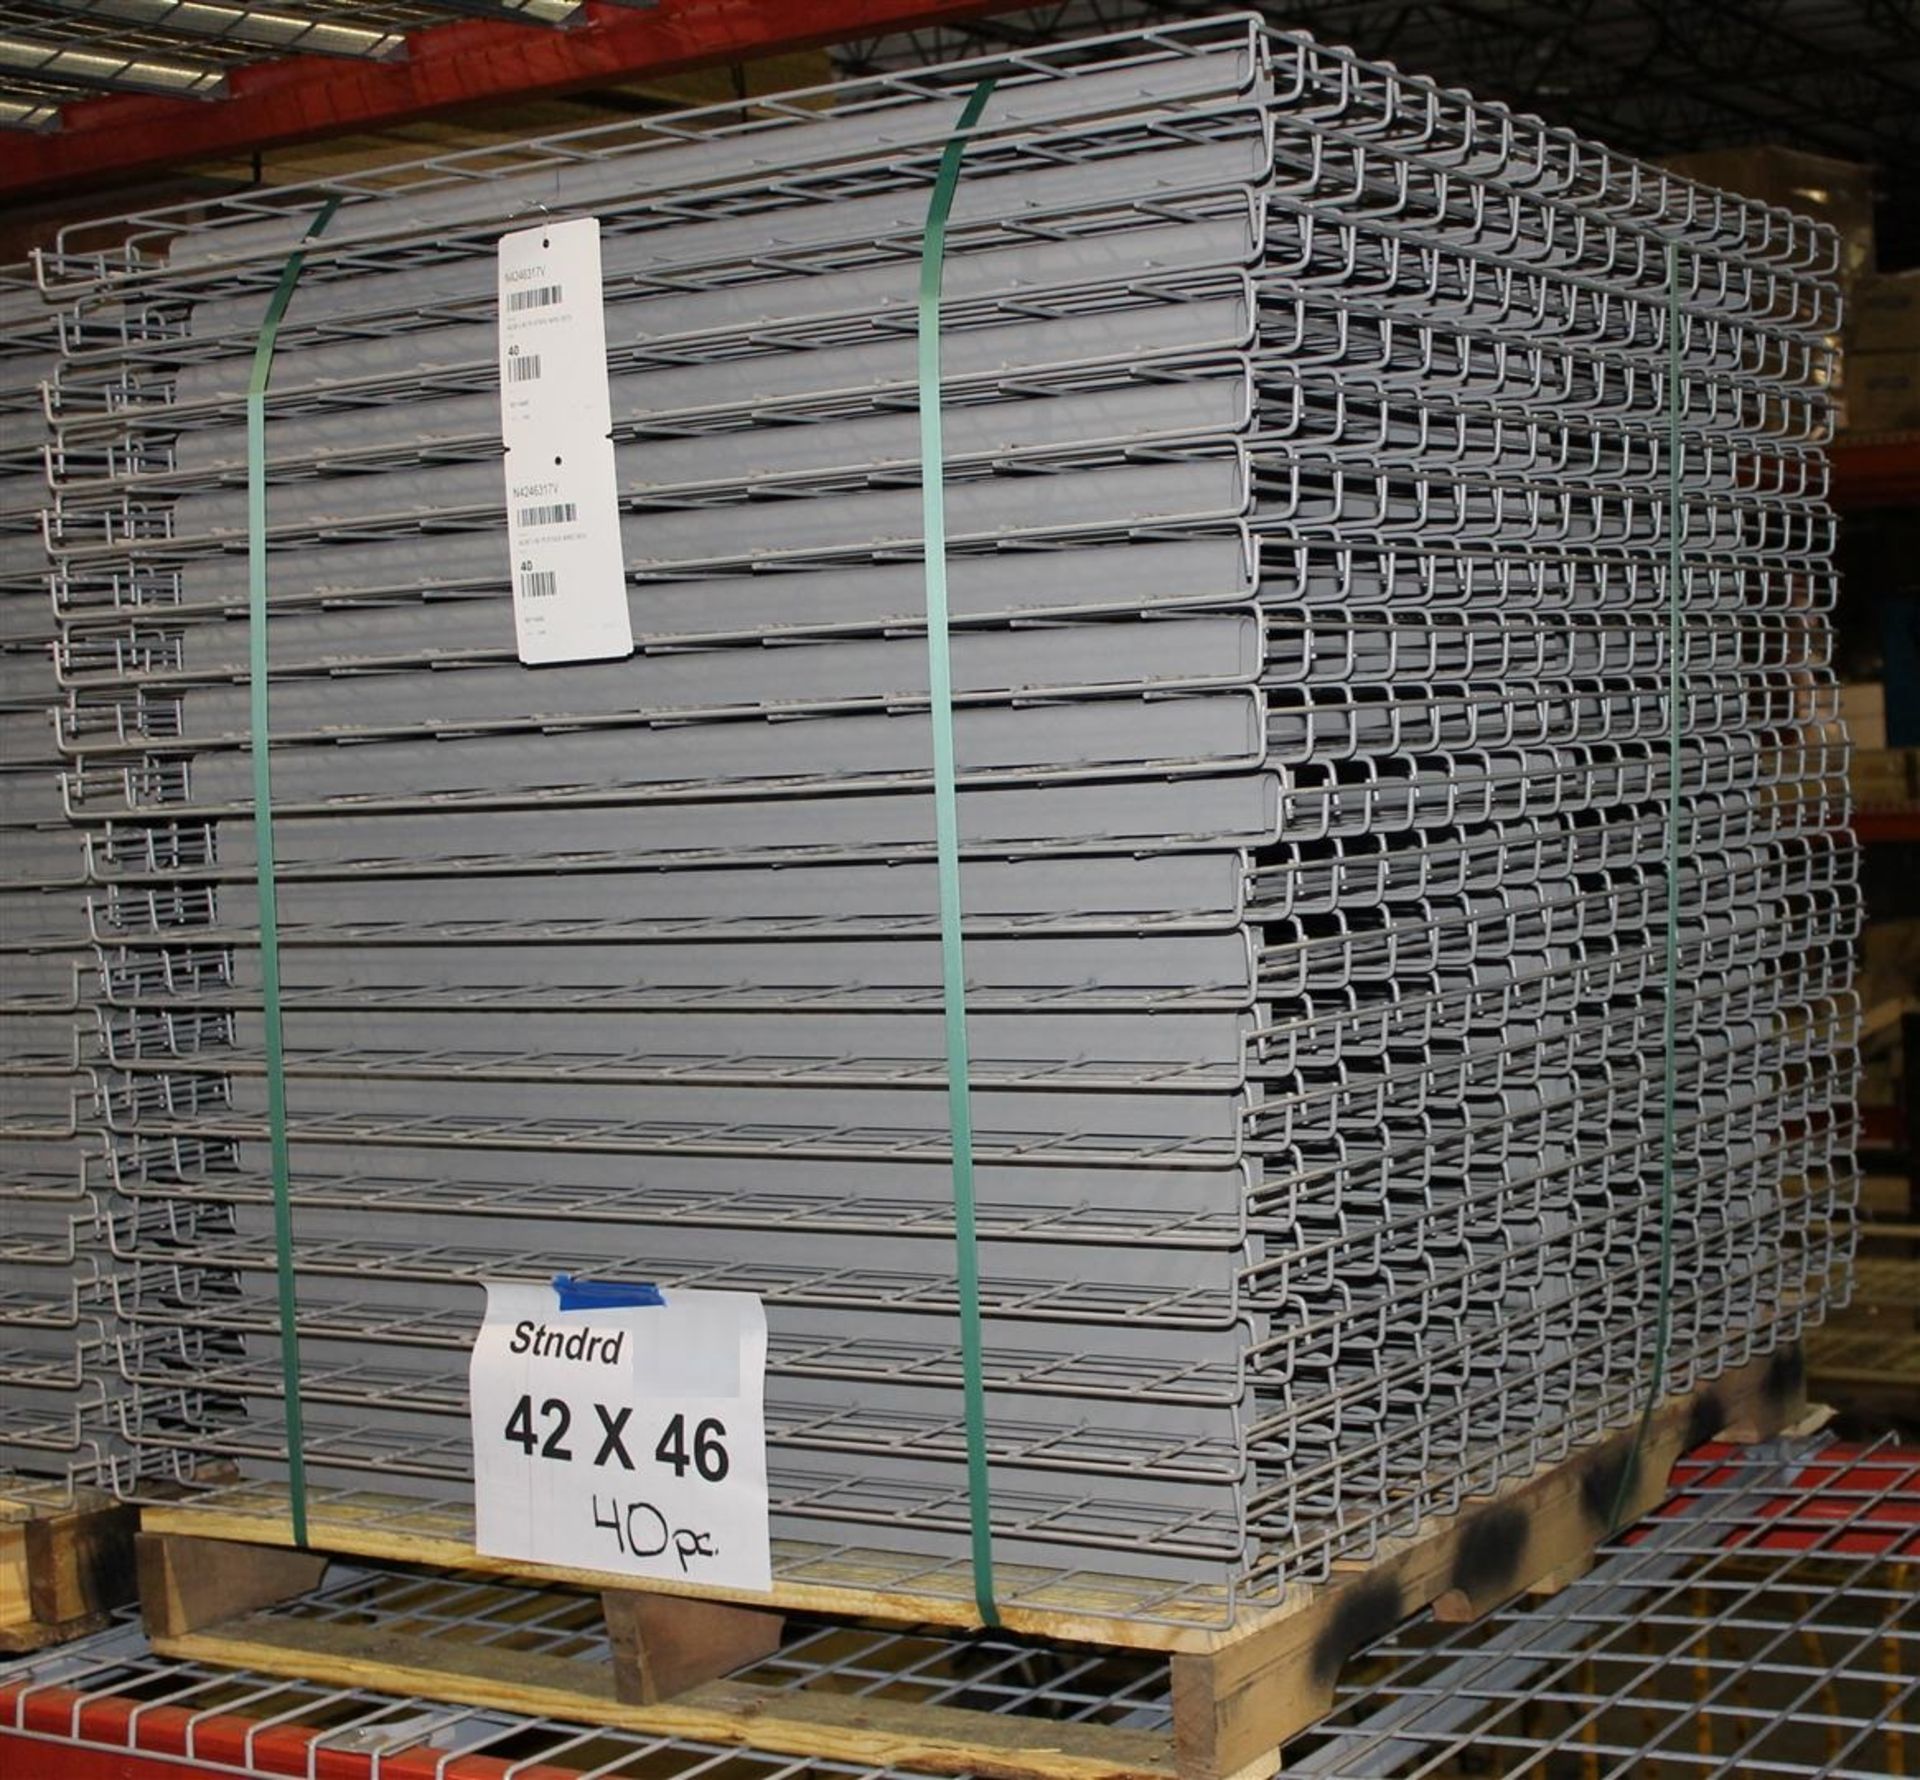 14 BAYS OF TEARDROP STYLE PALLET RACK, LIKE NEW, SIZE: 16'H x 42"D X 8'W - Image 4 of 5